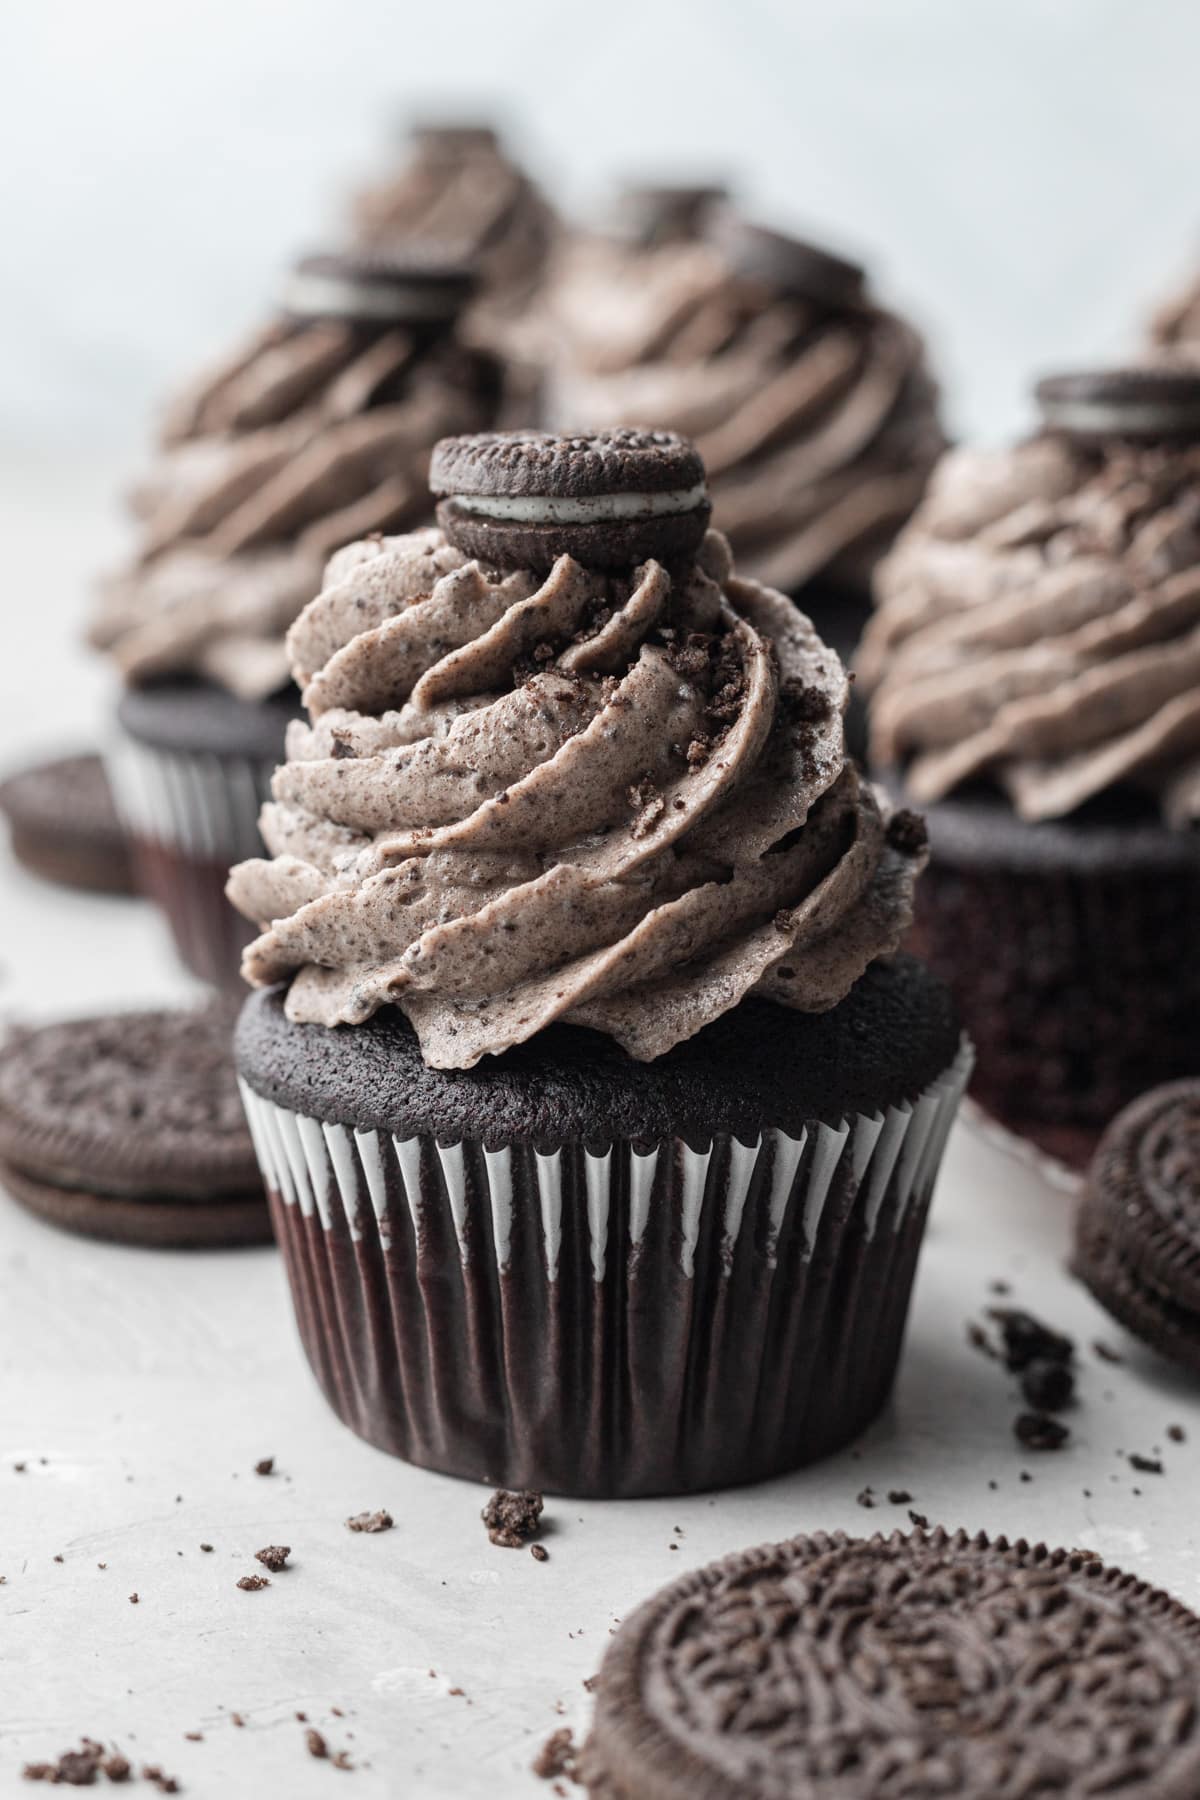 A cookies and cream cupcake in front of other cupcakes with Oreo cookies scattered around